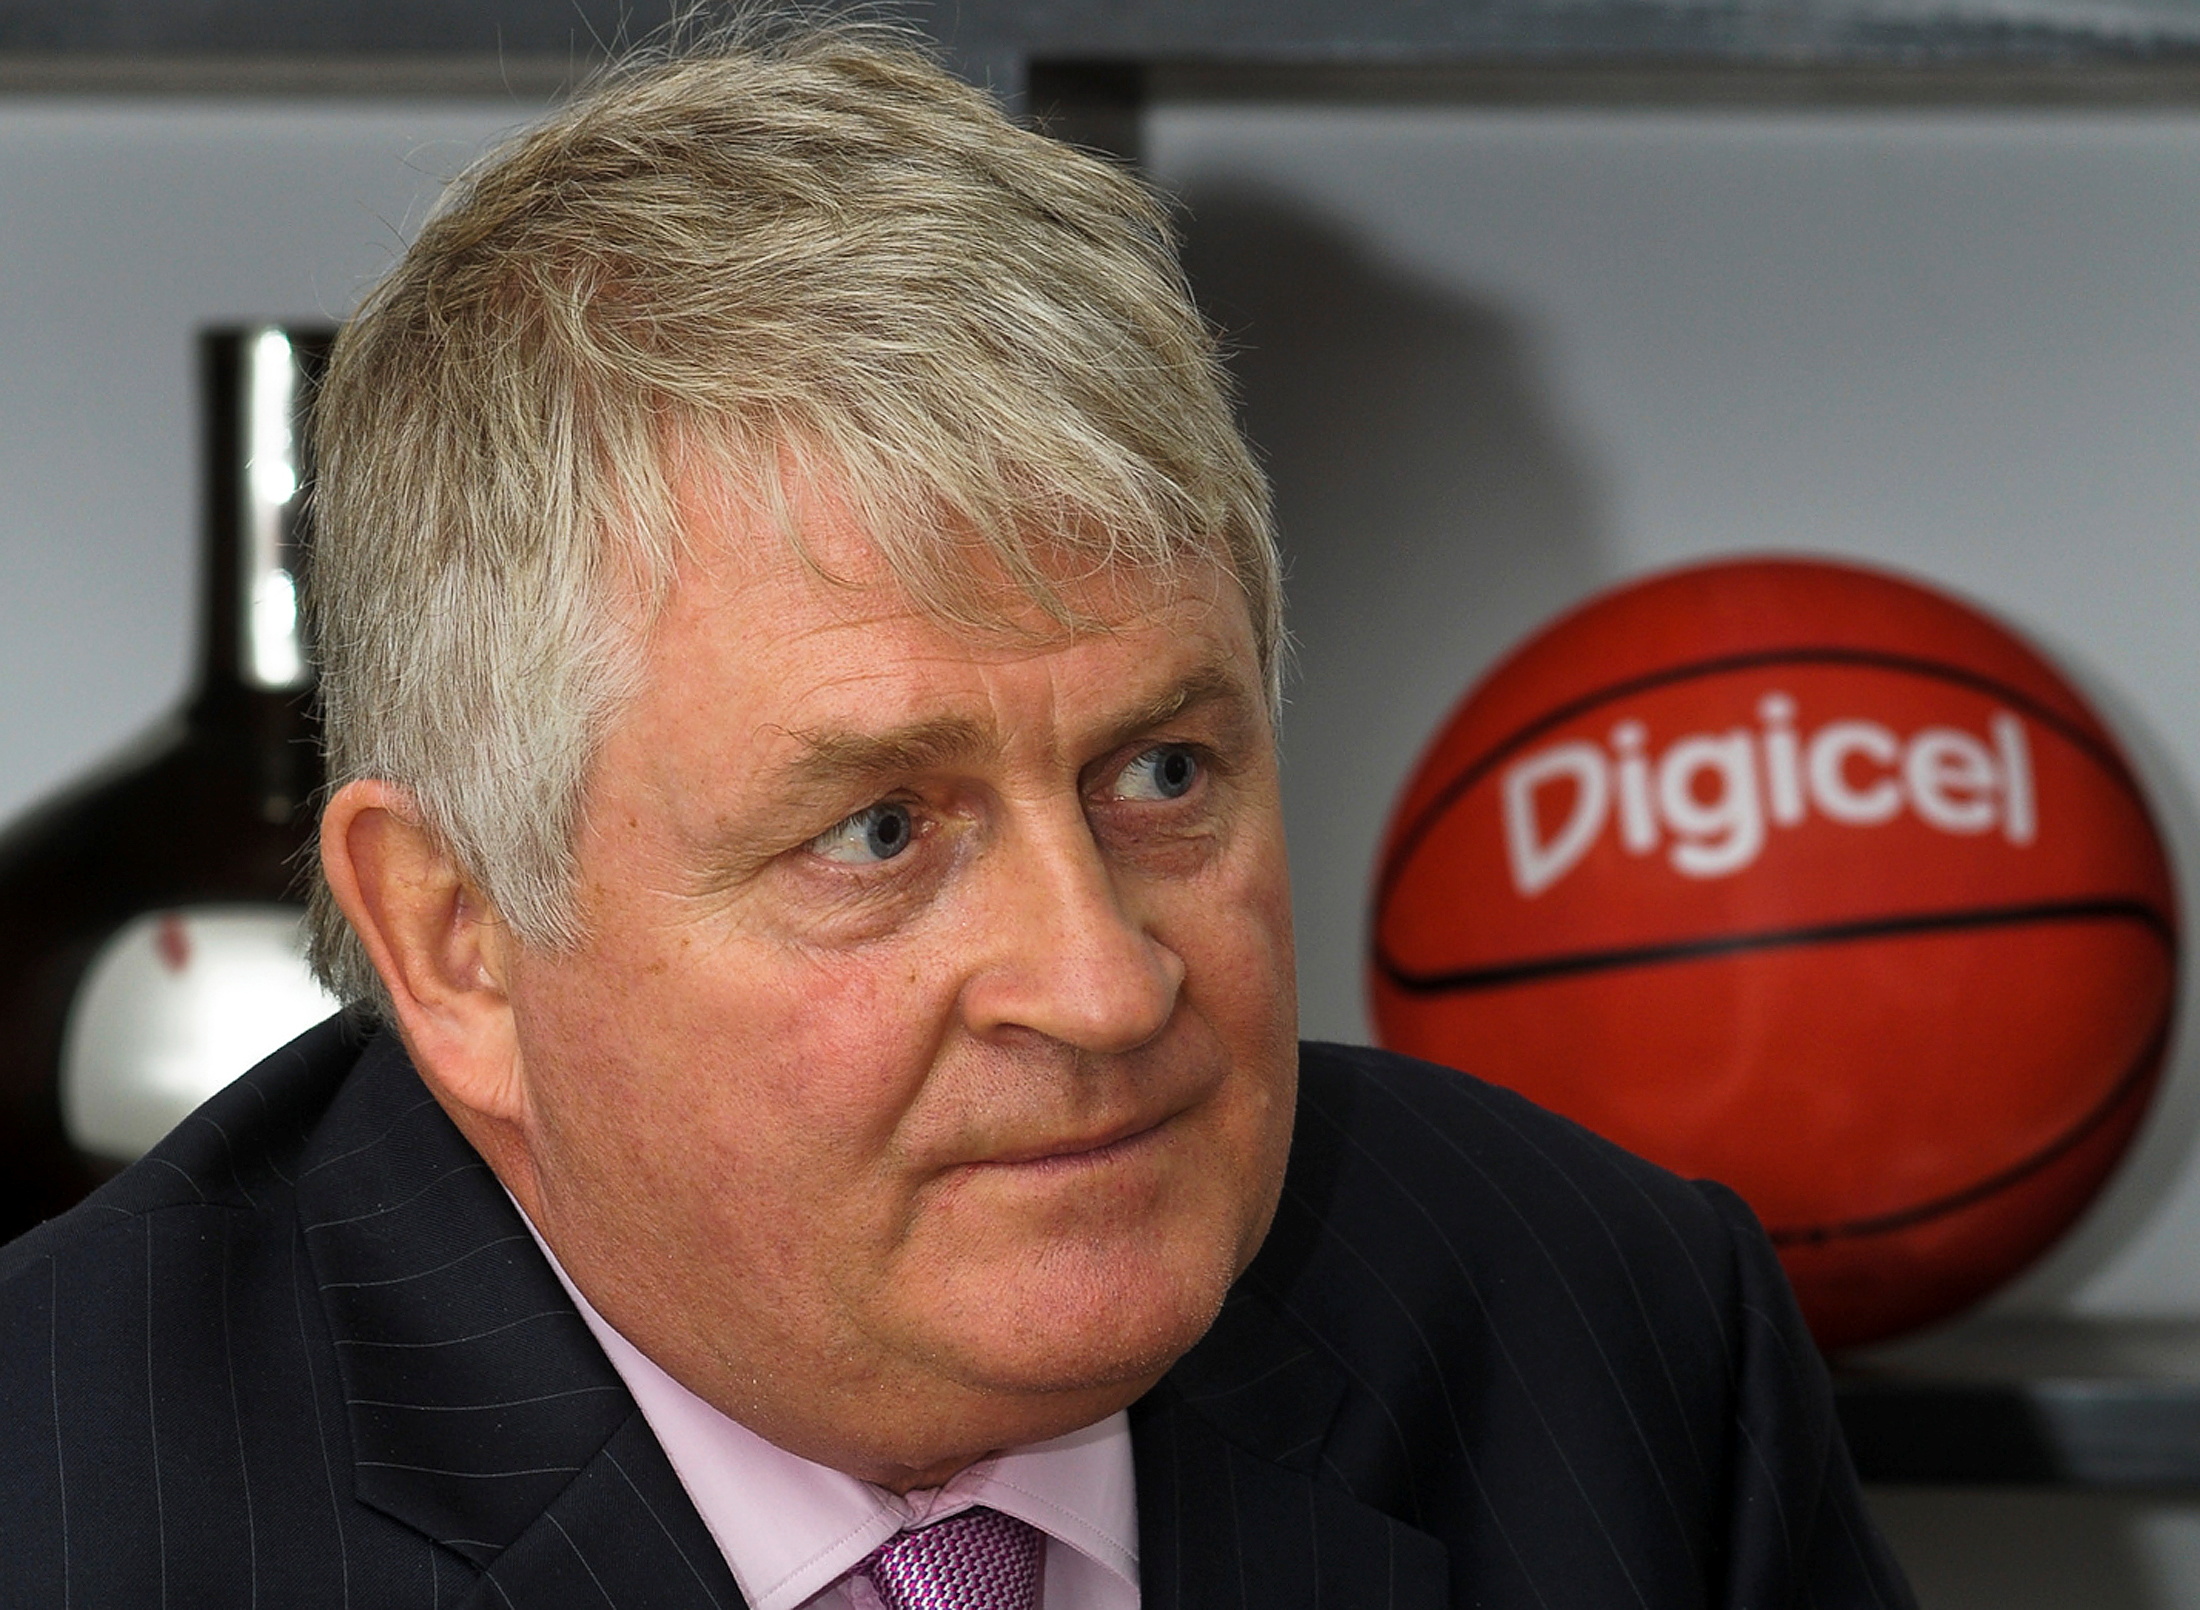 Digicel Chairman Denis O'Brien attends an interview with Reuters at the company's headquarters in Port-au-Prince